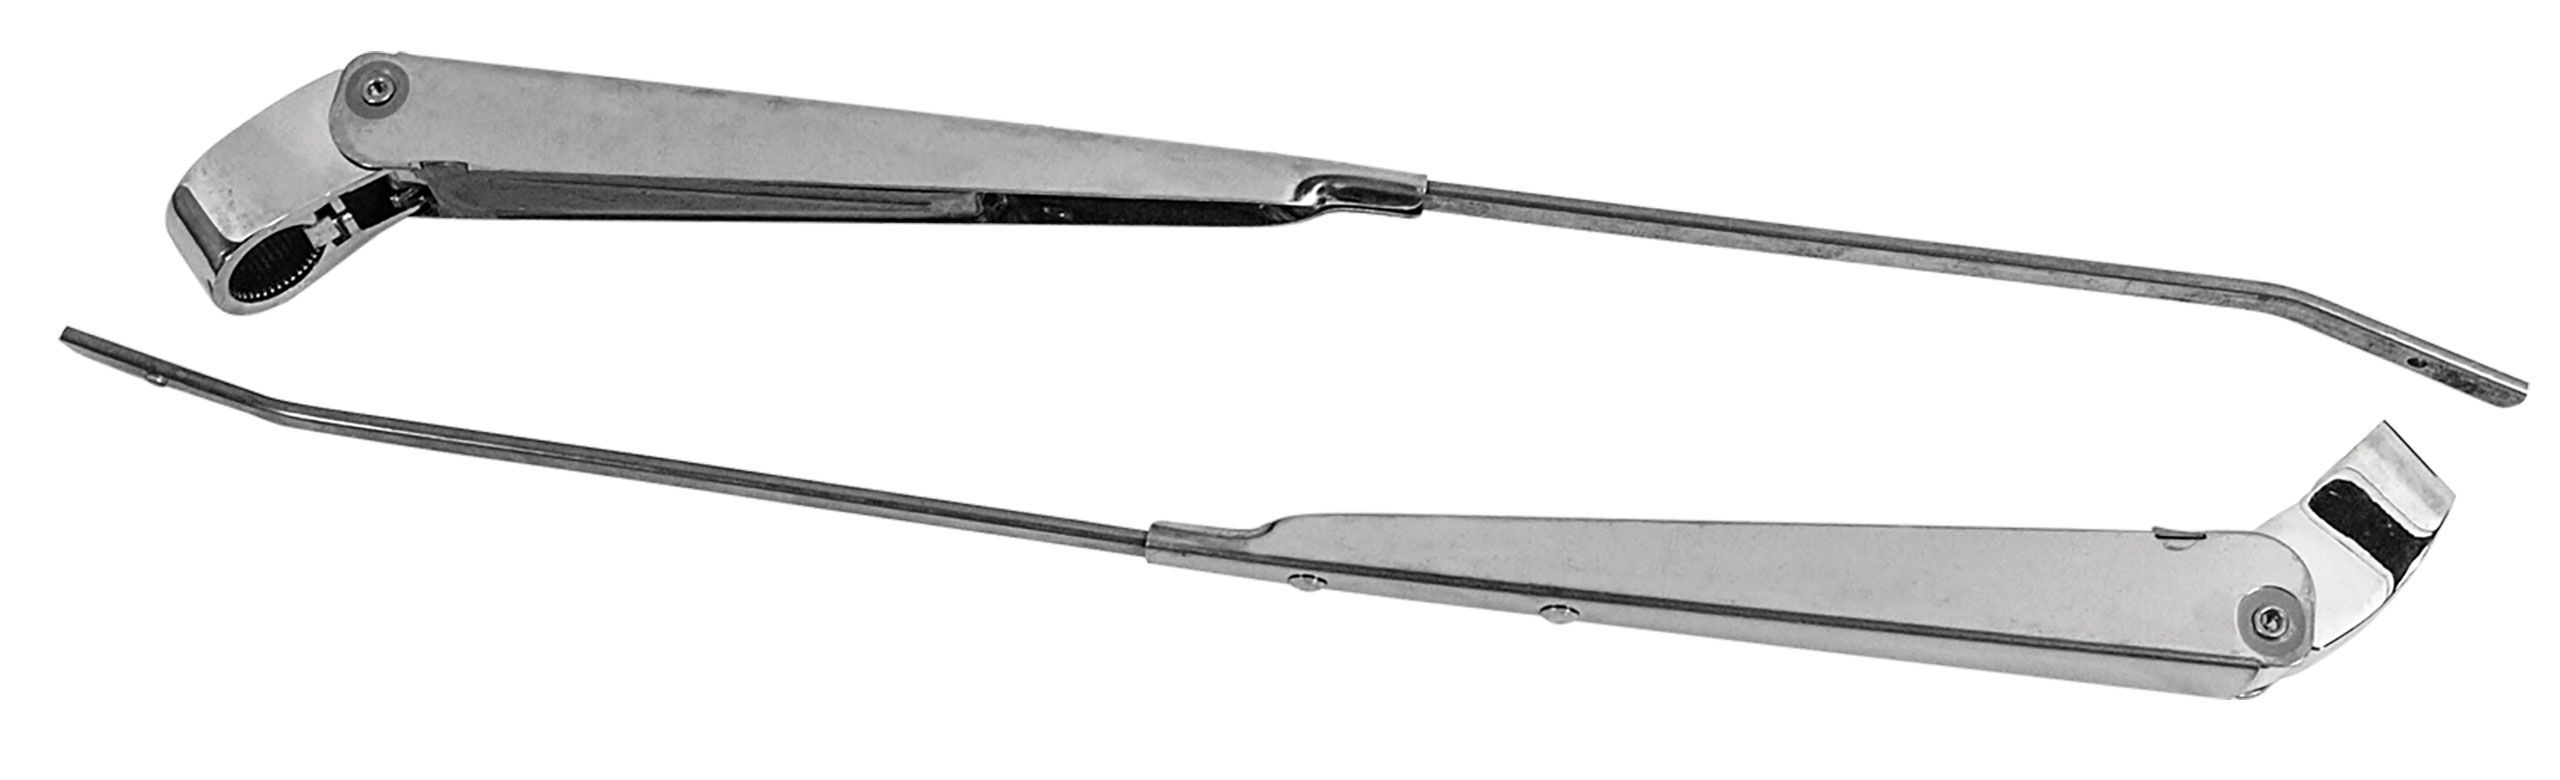 First Generation 1964-1965 Ford Mustang Windshield Wiper Arms - CA